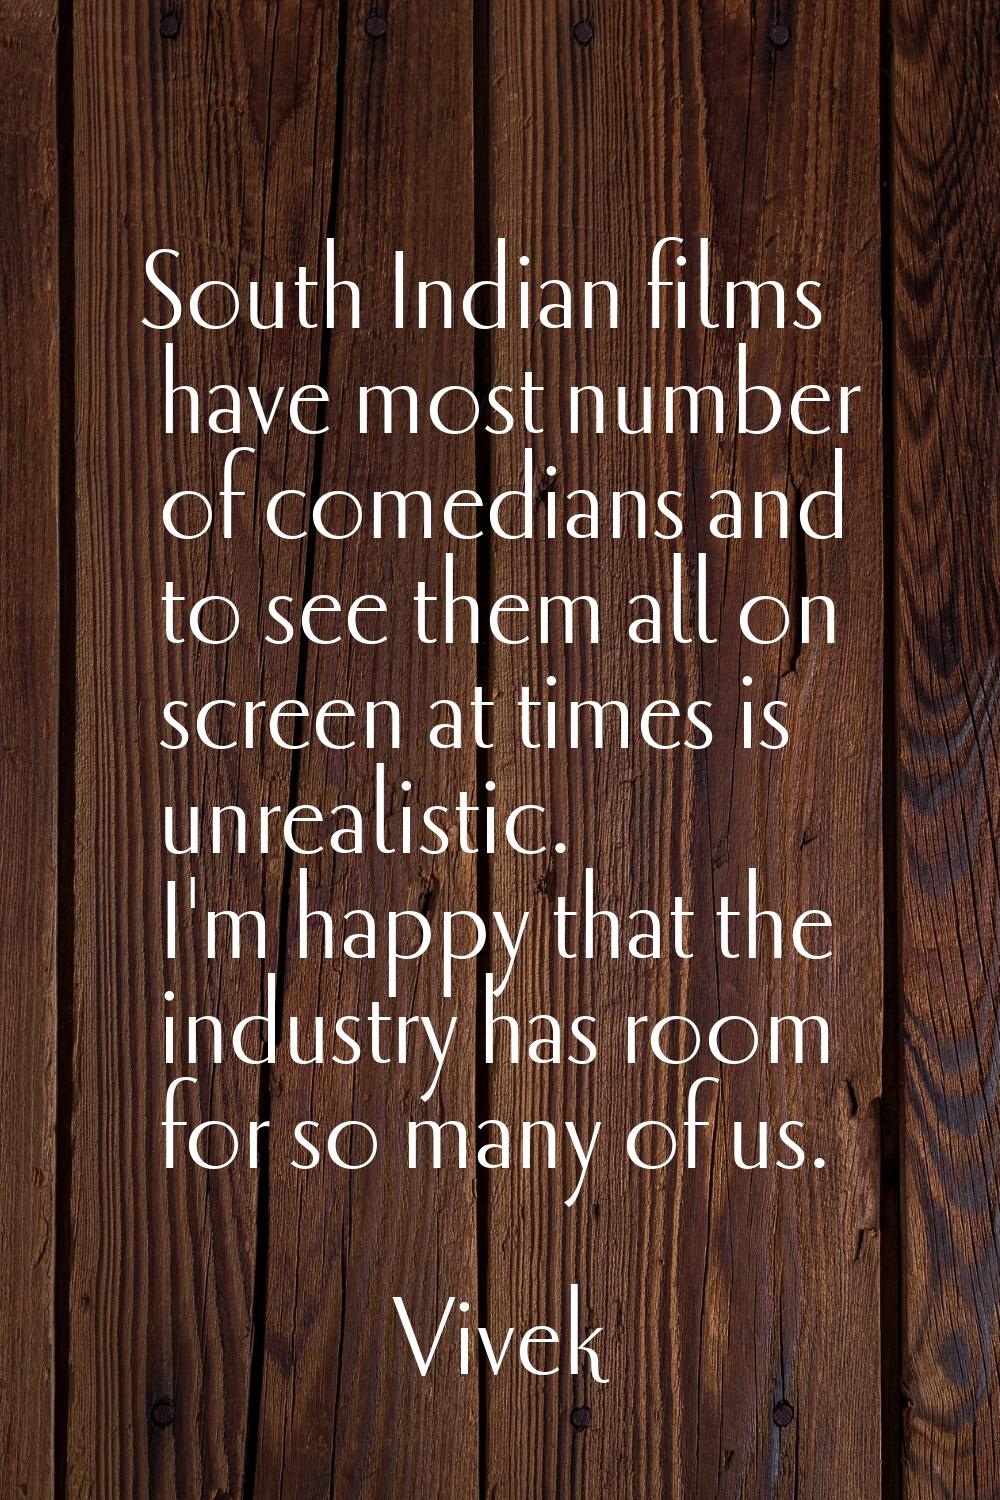 South Indian films have most number of comedians and to see them all on screen at times is unrealis